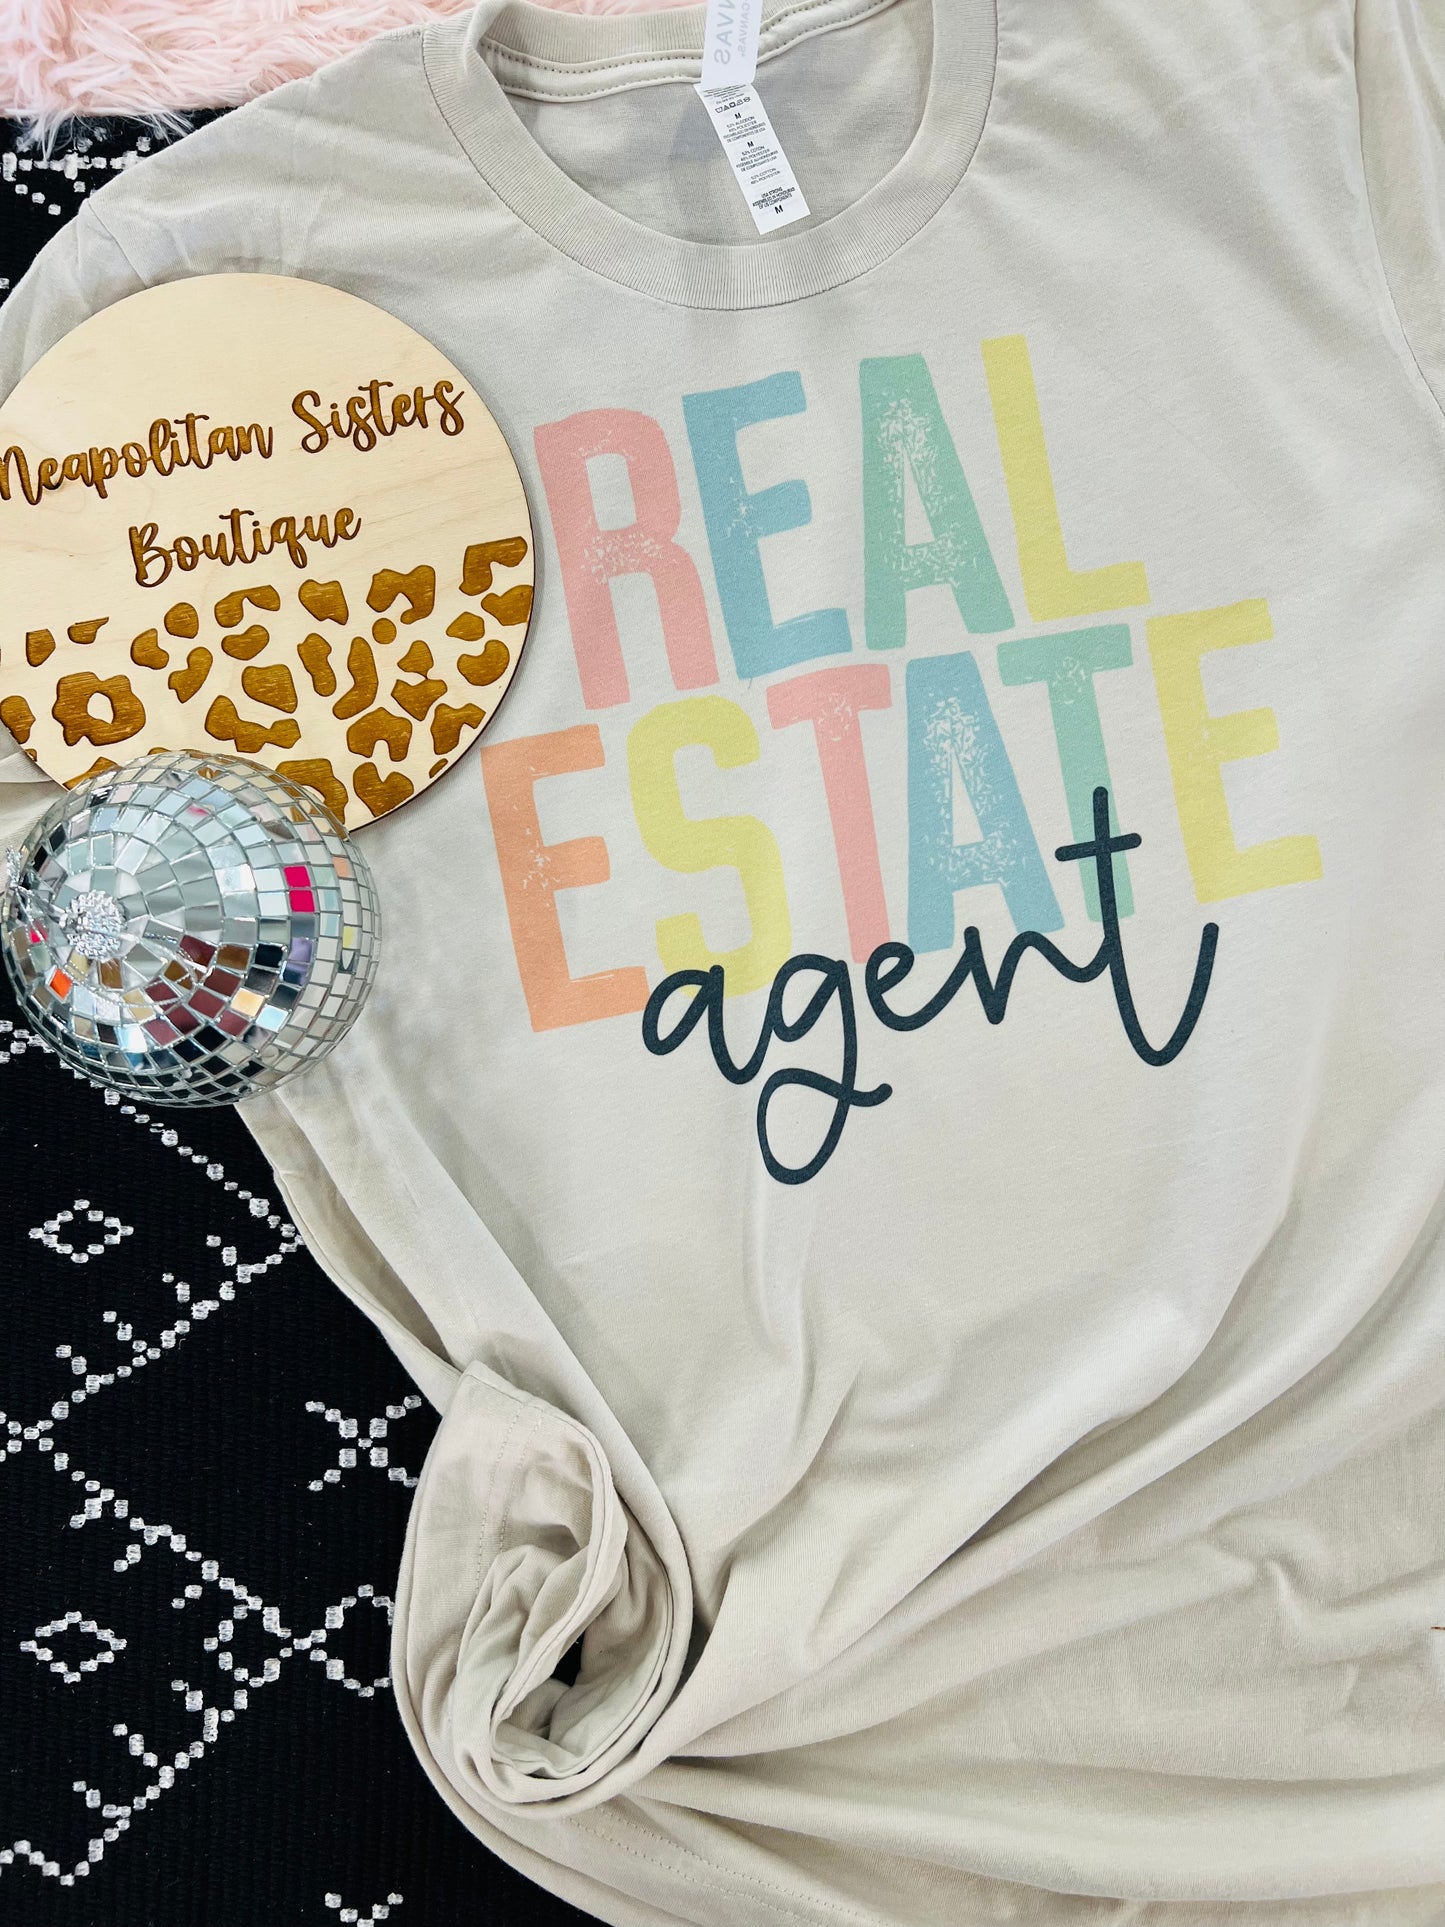 Real estate agent tee